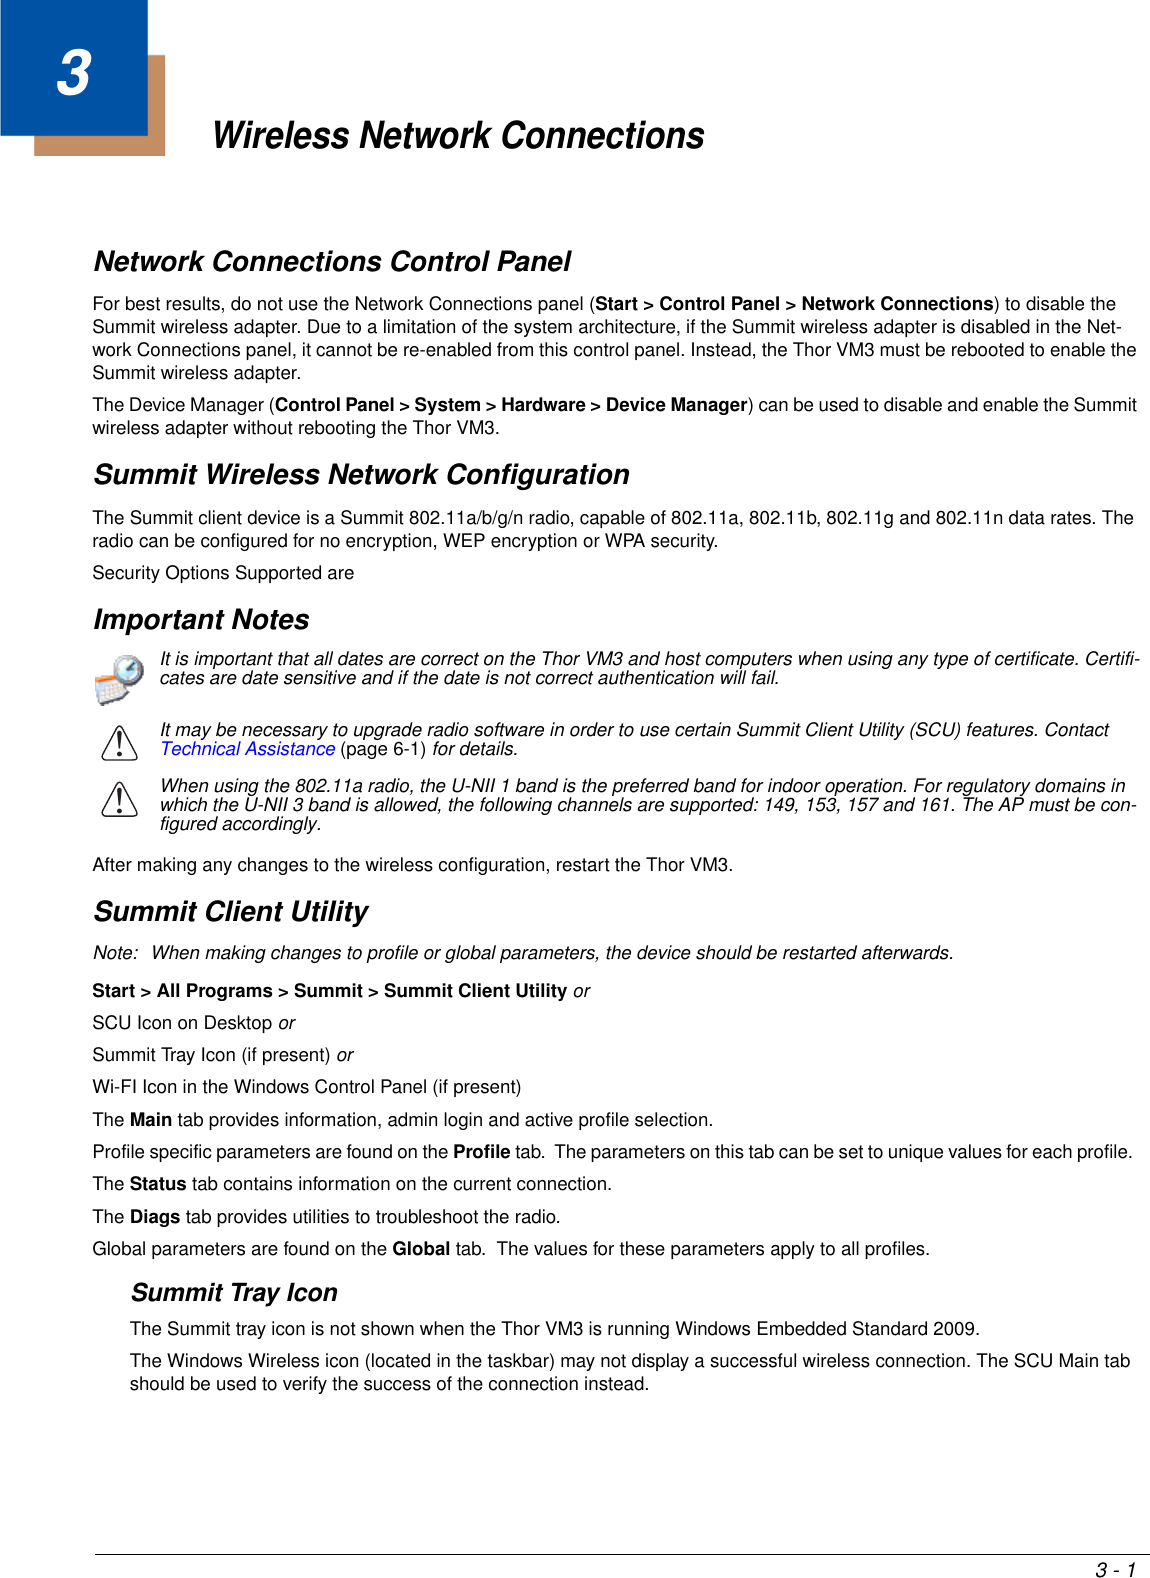 3 - 13Wireless Network ConnectionsNetwork Connections Control PanelFor best results, do not use the Network Connections panel (Start &gt; Control Panel &gt; Network Connections) to disable the Summit wireless adapter. Due to a limitation of the system architecture, if the Summit wireless adapter is disabled in the Net-work Connections panel, it cannot be re-enabled from this control panel. Instead, the Thor VM3 must be rebooted to enable the Summit wireless adapter.The Device Manager (Control Panel &gt; System &gt; Hardware &gt; Device Manager) can be used to disable and enable the Summit wireless adapter without rebooting the Thor VM3.Summit Wireless Network ConfigurationThe Summit client device is a Summit 802.11a/b/g/n radio, capable of 802.11a, 802.11b, 802.11g and 802.11n data rates. The radio can be configured for no encryption, WEP encryption or WPA security.Security Options Supported areImportant NotesAfter making any changes to the wireless configuration, restart the Thor VM3.Summit Client UtilityNote: When making changes to profile or global parameters, the device should be restarted afterwards.Start &gt; All Programs &gt; Summit &gt; Summit Client Utility or SCU Icon on Desktop orSummit Tray Icon (if present) orWi-FI Icon in the Windows Control Panel (if present)The Main tab provides information, admin login and active profile selection.Profile specific parameters are found on the Profile tab.  The parameters on this tab can be set to unique values for each profile.  The Status tab contains information on the current connection.The Diags tab provides utilities to troubleshoot the radio.Global parameters are found on the Global tab.  The values for these parameters apply to all profiles.Summit Tray IconThe Summit tray icon is not shown when the Thor VM3 is running Windows Embedded Standard 2009.The Windows Wireless icon (located in the taskbar) may not display a successful wireless connection. The SCU Main tab should be used to verify the success of the connection instead.It is important that all dates are correct on the Thor VM3 and host computers when using any type of certificate. Certifi-cates are date sensitive and if the date is not correct authentication will fail.It may be necessary to upgrade radio software in order to use certain Summit Client Utility (SCU) features. Contact Technical Assistance (page 6-1) for details.When using the 802.11a radio, the U-NII 1 band is the preferred band for indoor operation. For regulatory domains in which the U-NII 3 band is allowed, the following channels are supported: 149, 153, 157 and 161. The AP must be con-figured accordingly.!!